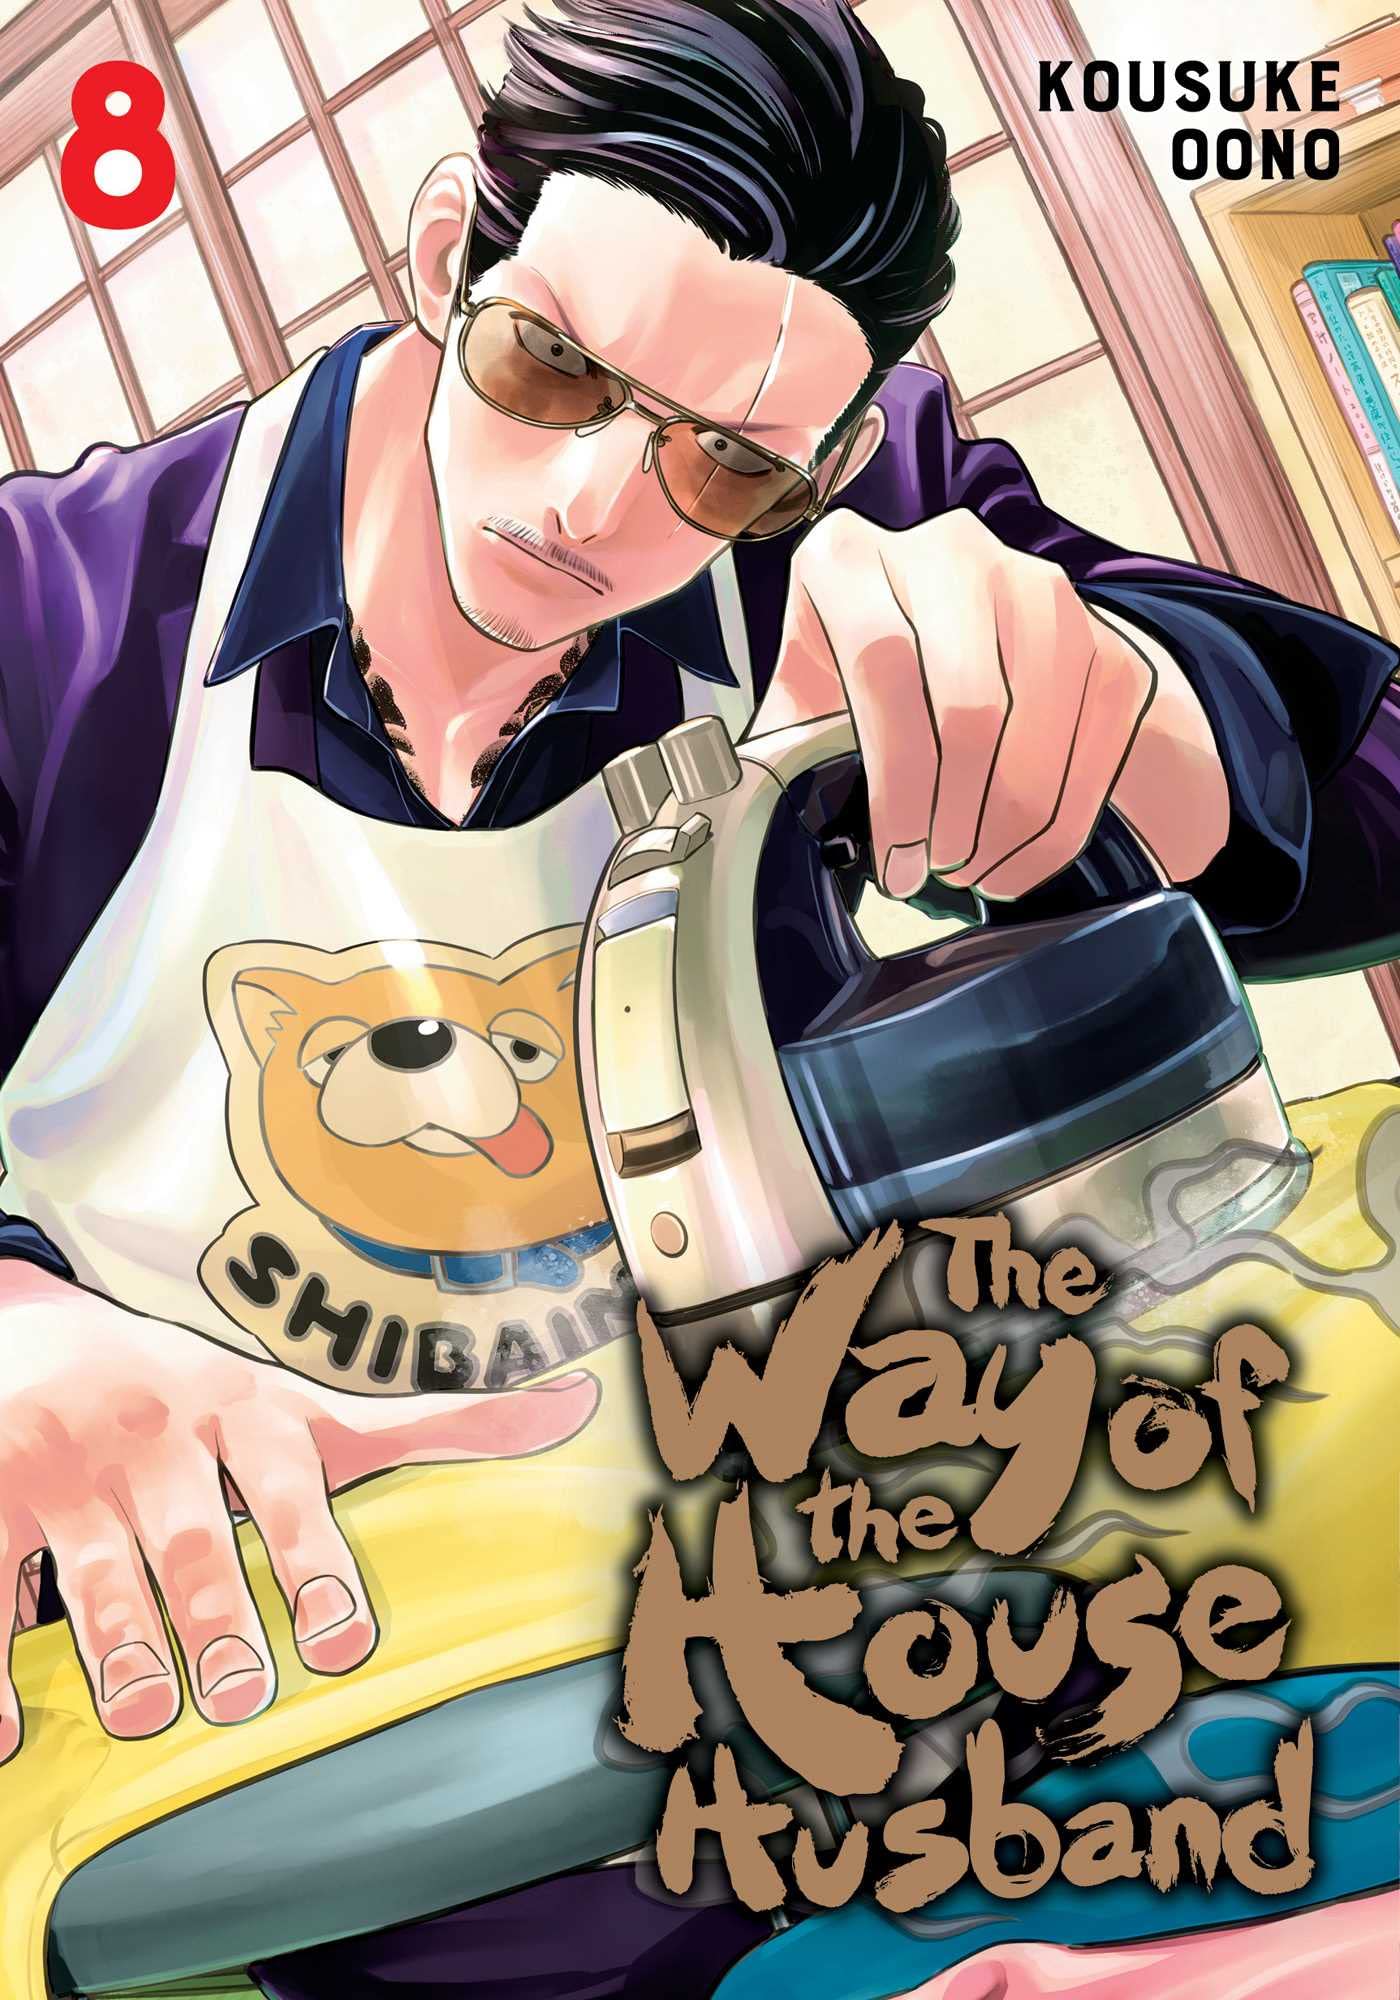 The Way of the Househusband Vol. 08